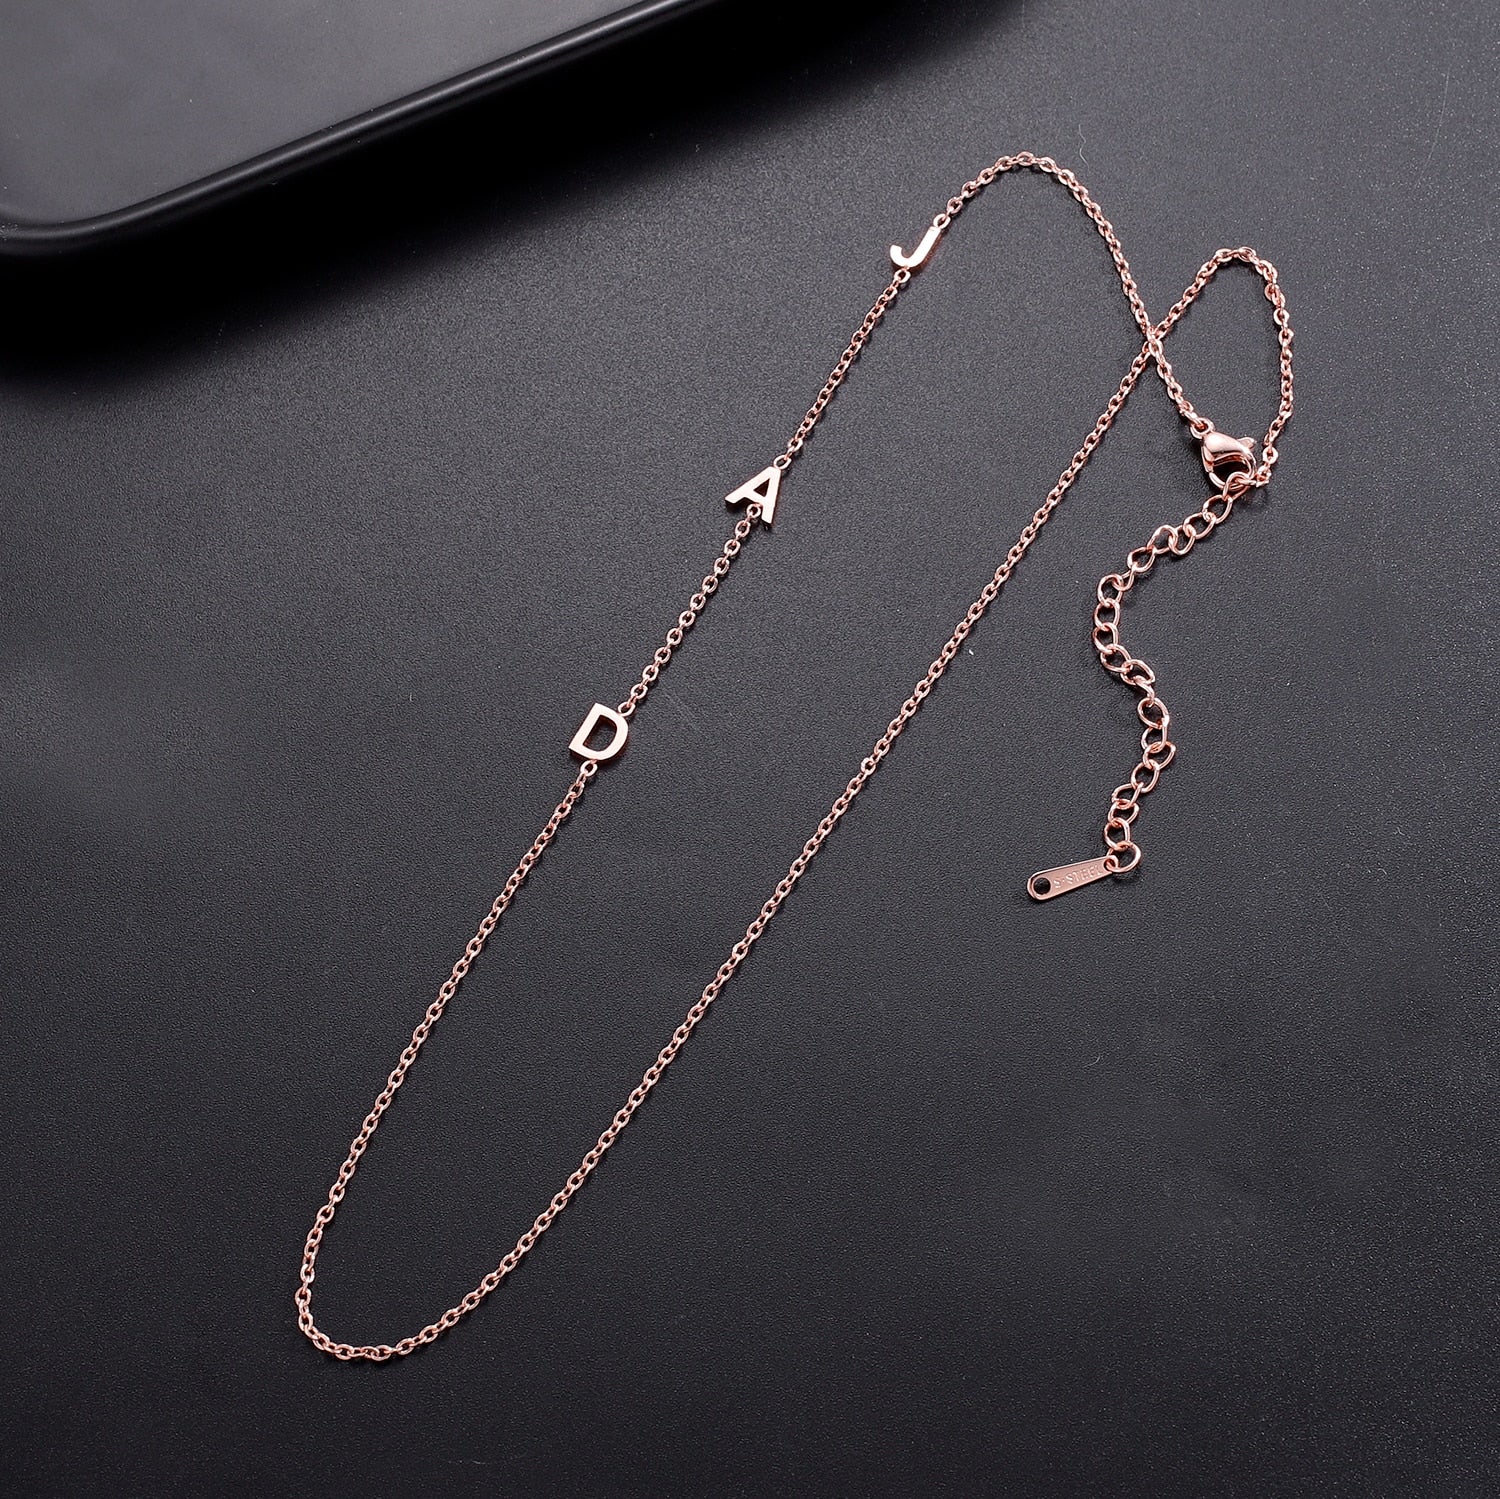 Personalised Sideways Initials Necklace Inspired by Meghan Markle